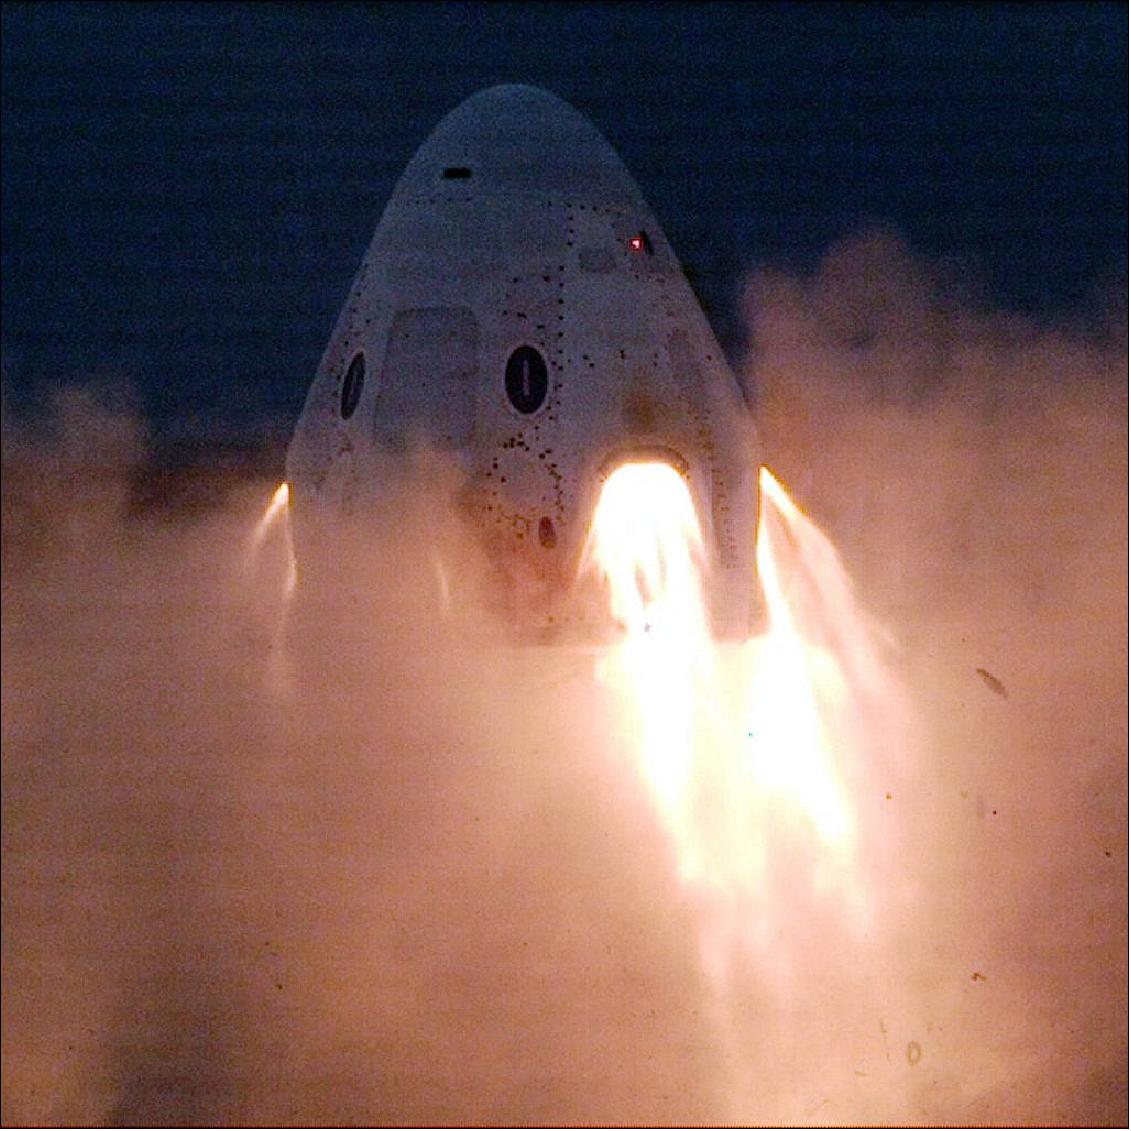 Figure 26: The tests will help validate the launch escape system ahead of Crew Dragon's in-flight abort demonstration planned as part of NASA's Commercial Crew Program. SpaceX and NASA will now review the data from Thursday's test, perform detailed hardware inspections, and establish a target launch date for the In-Flight Abort Test (image credit: NASA)